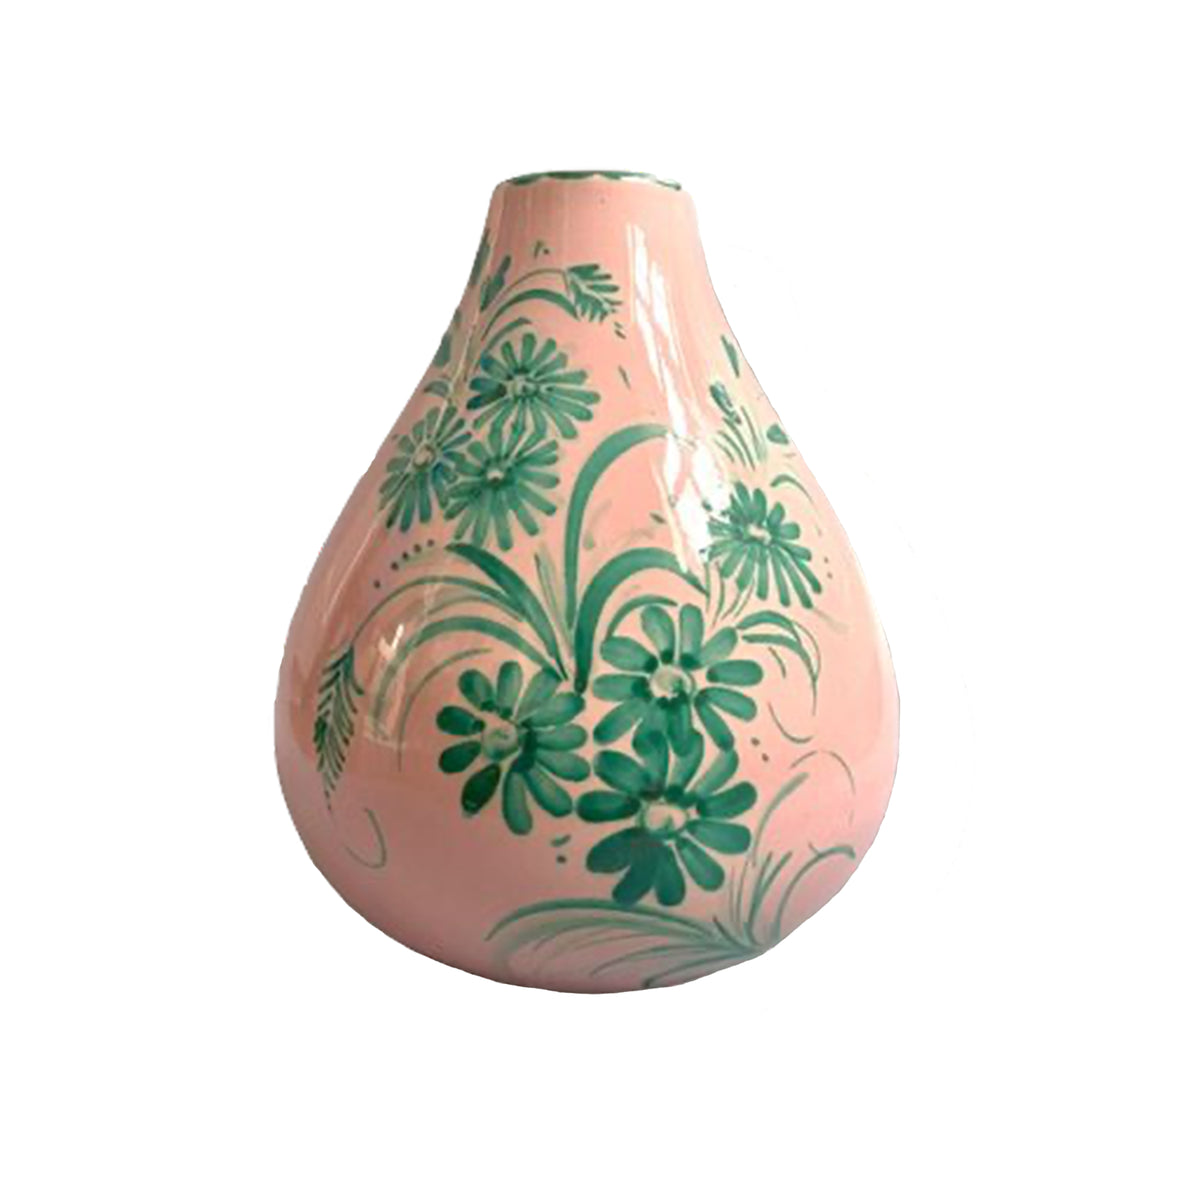 Drop It Like It's Hot Vase In Lilac & Green Floral Design